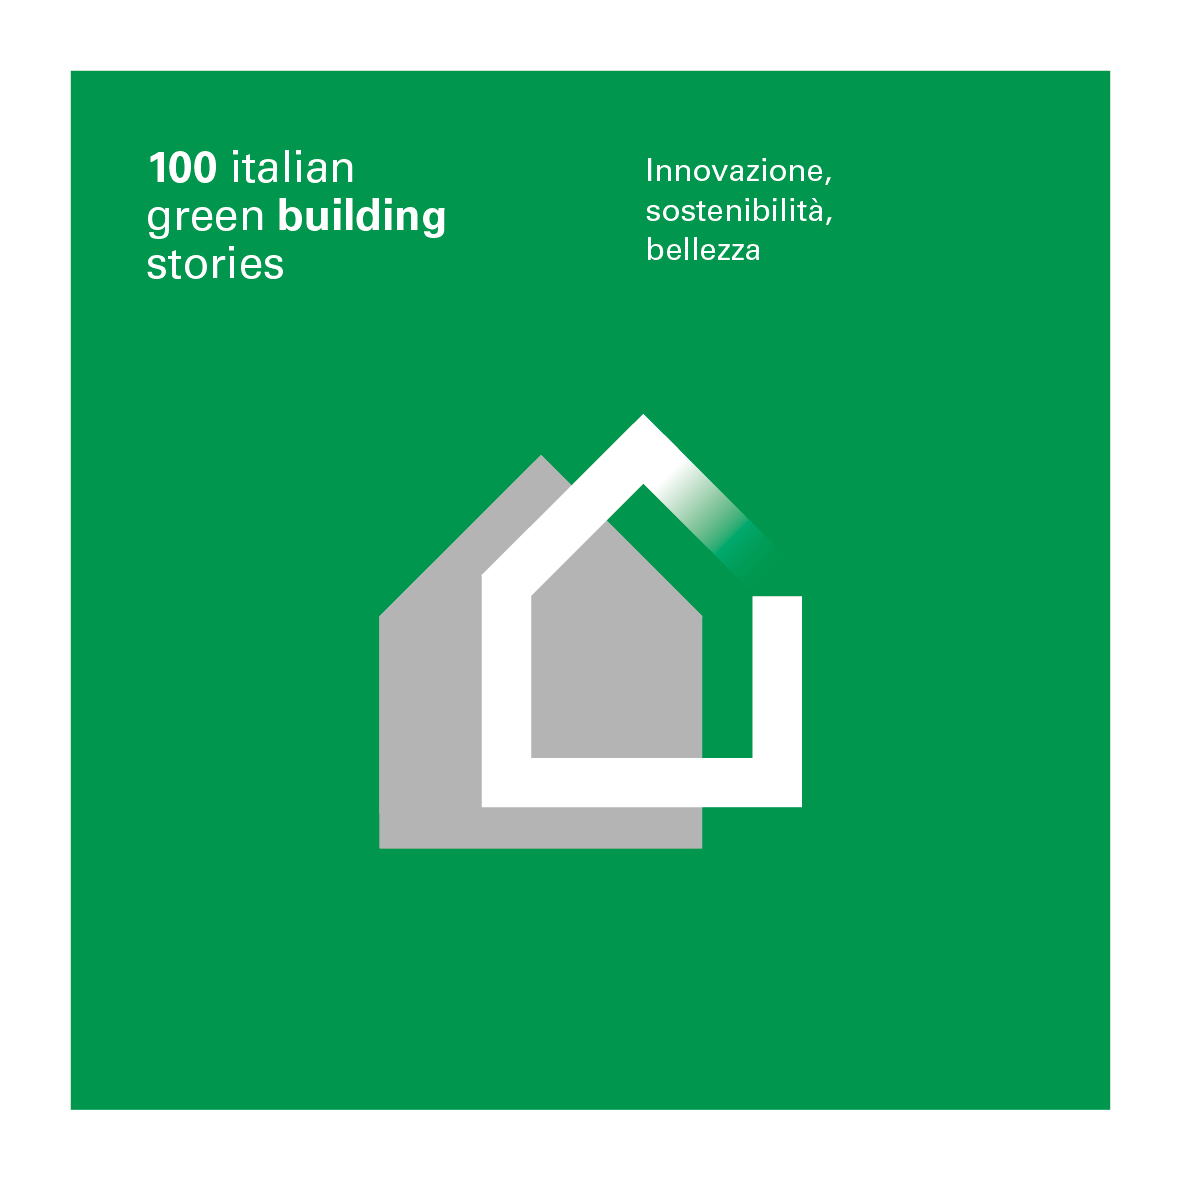 100 Italian stories for green building